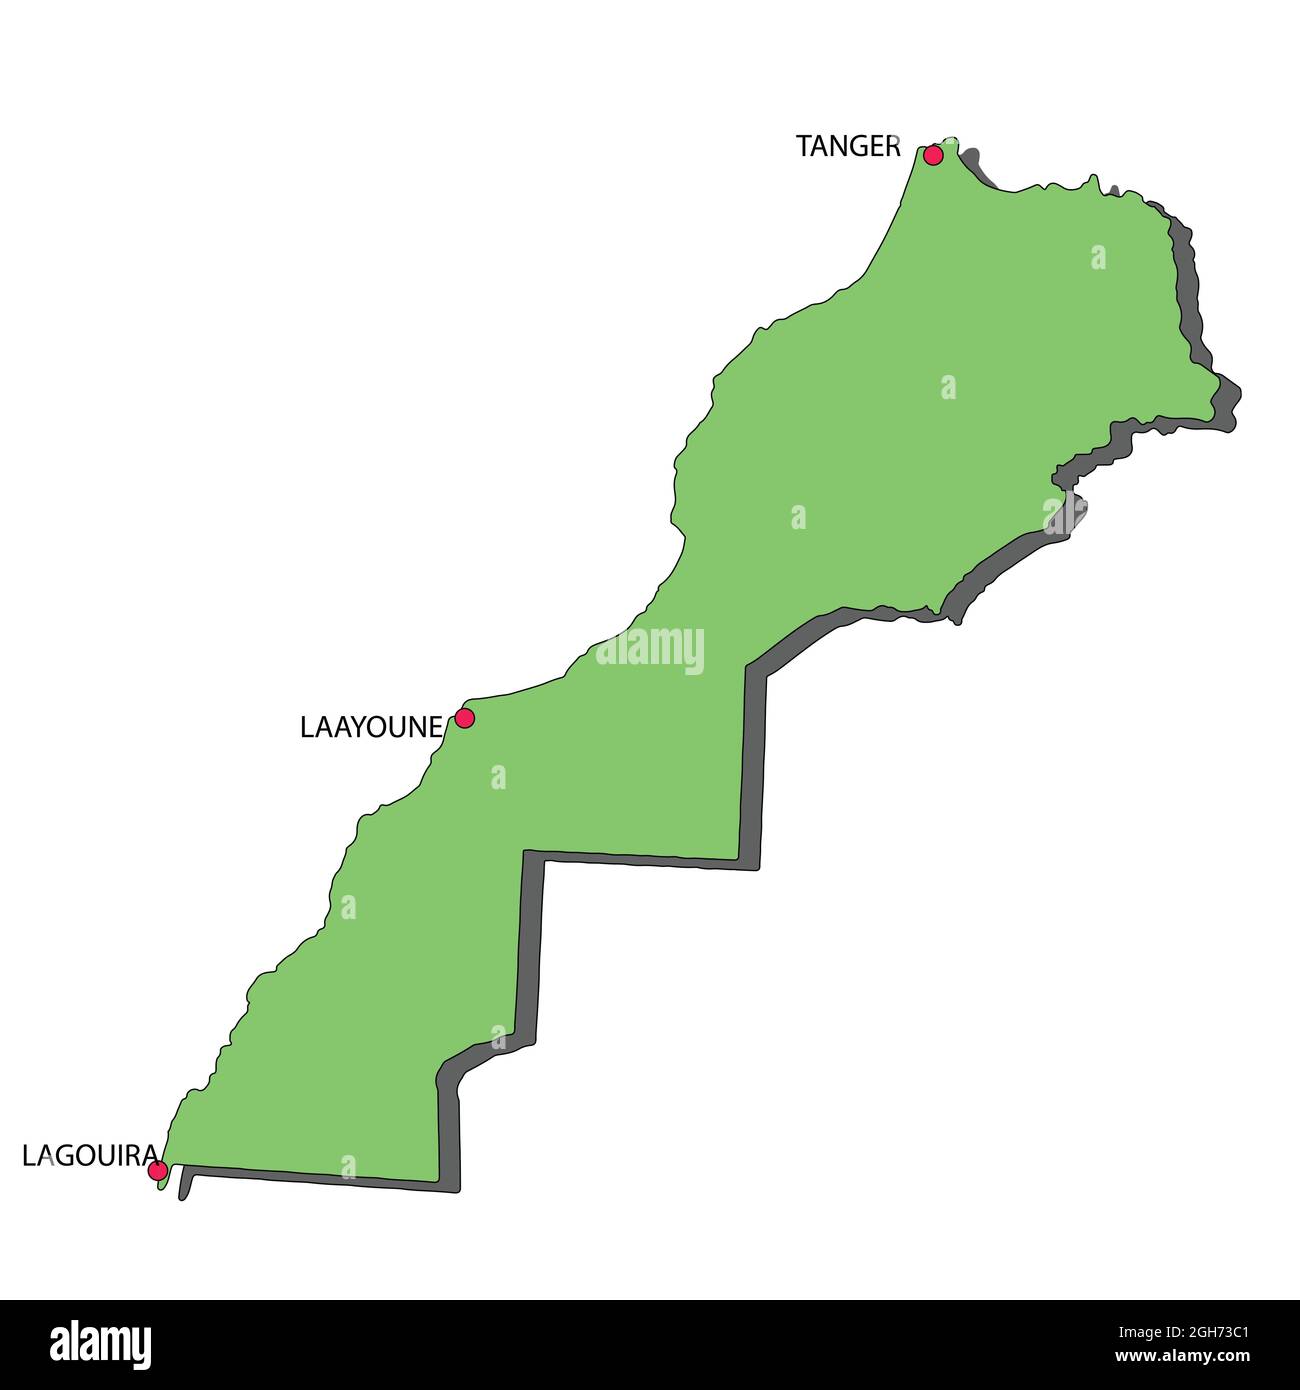 Morocco Map Green Color 3D Showing 3 Cities from North To West...Tangier to Lagouira Stock Vector